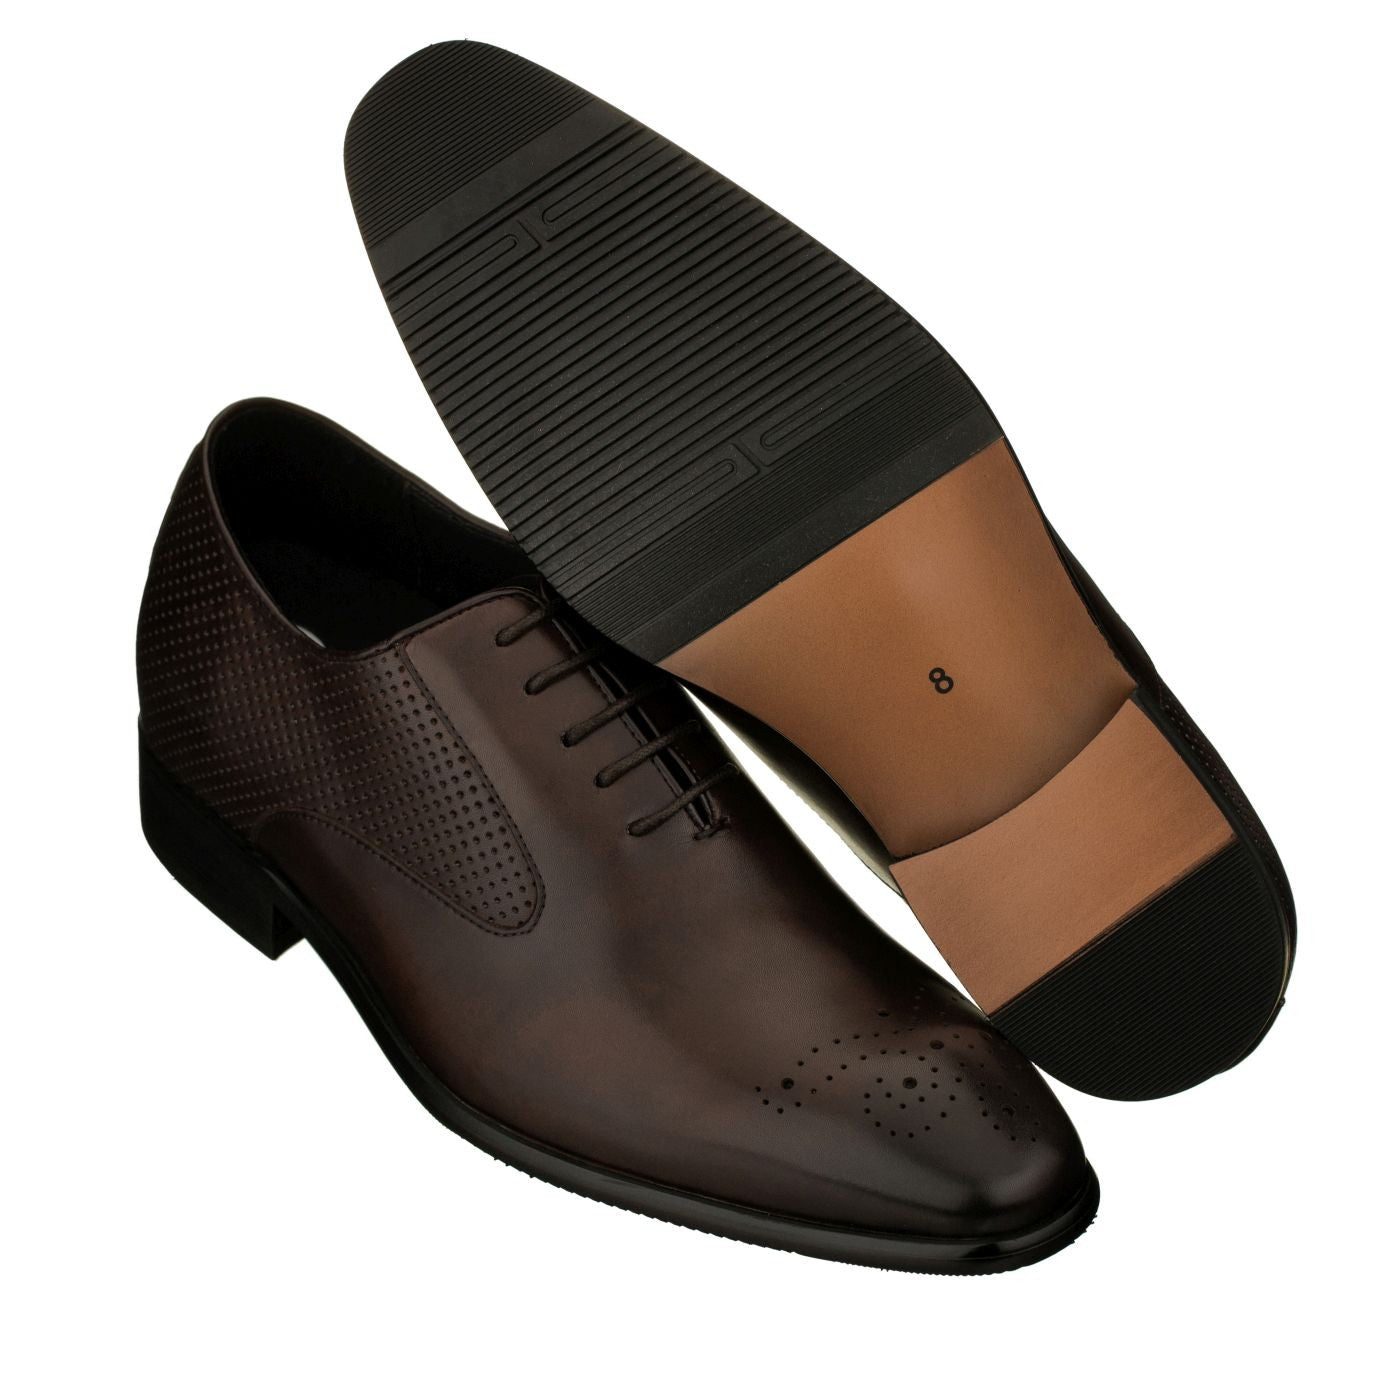 Elevator shoes height increase CALTO - Y6013 - 2.4 Inches Taller (Dark Coffee Brown)